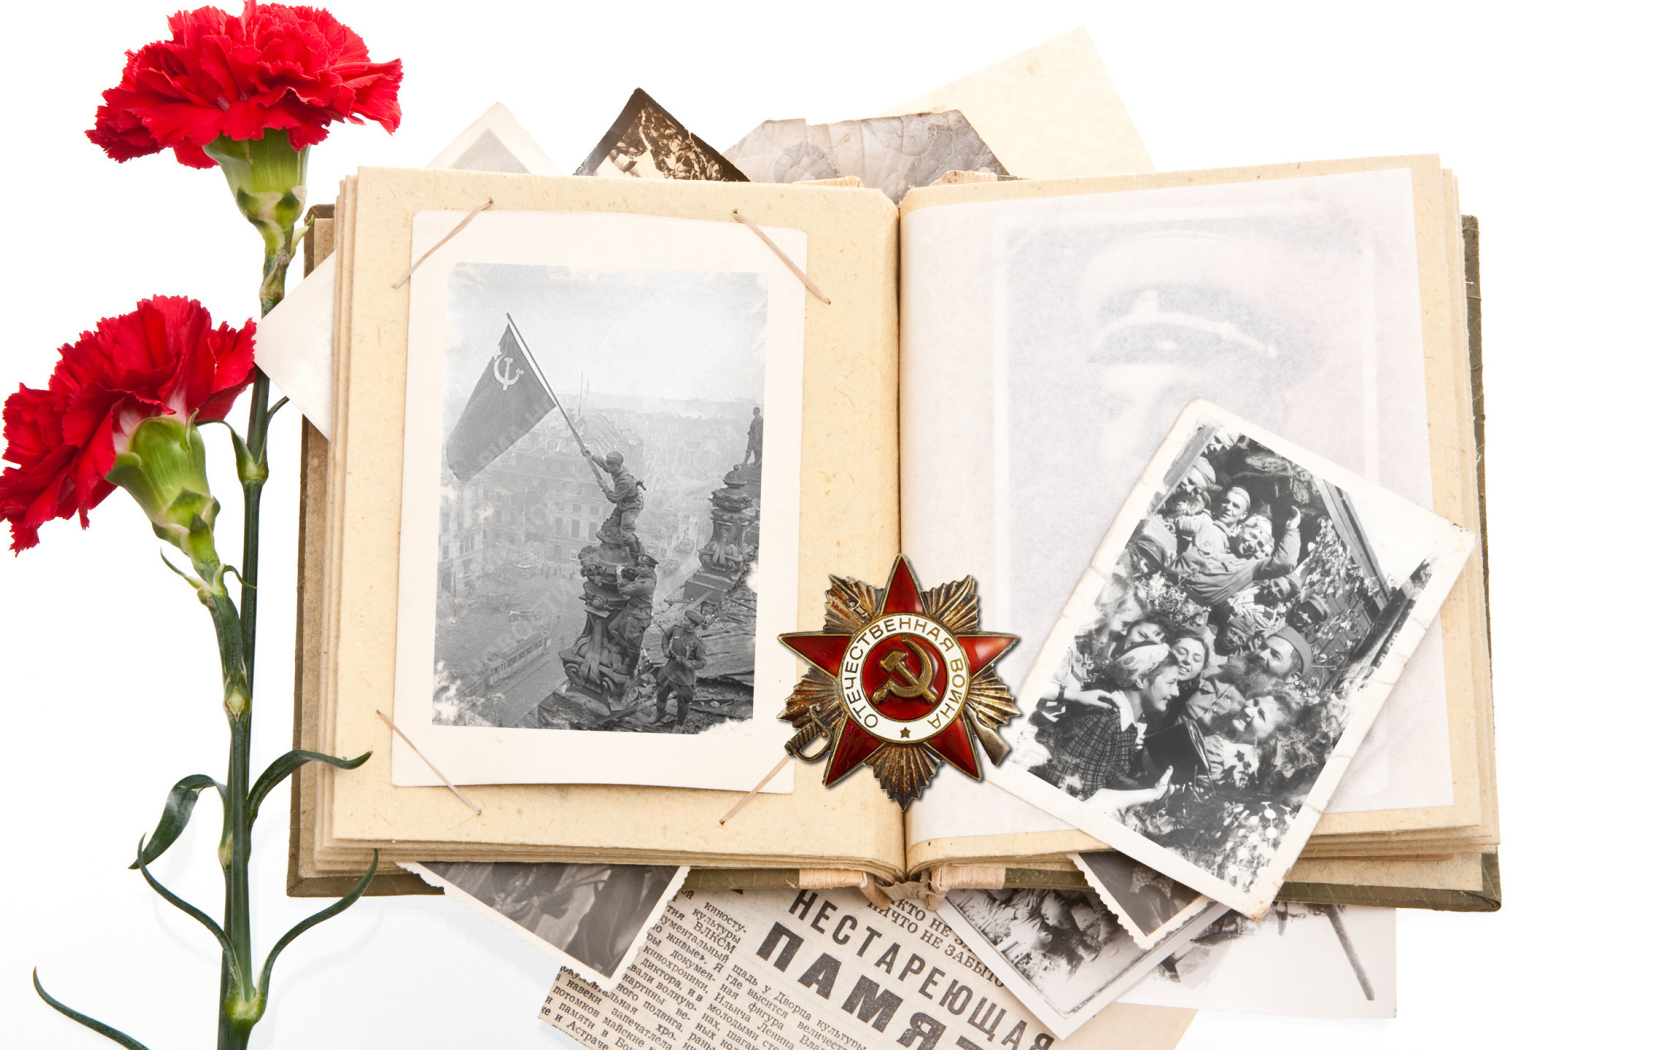 Book of Memory and the Order of the Patriotic War on Victory Day on May 9